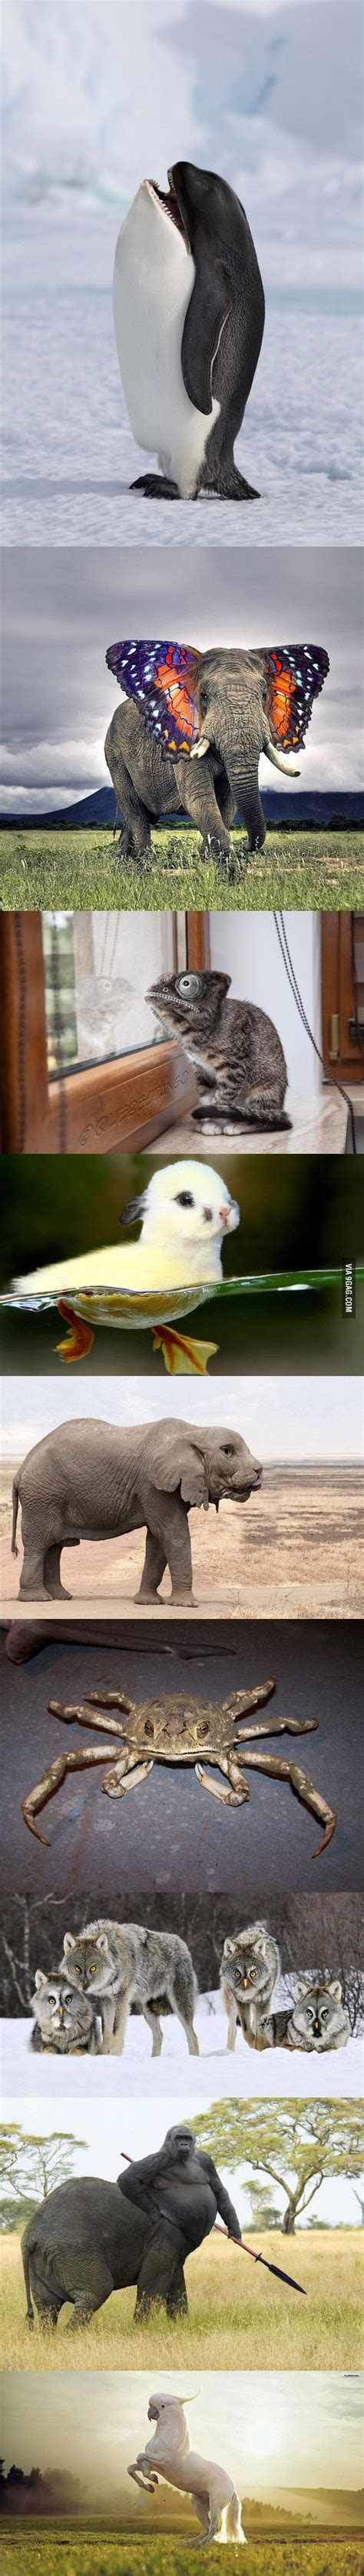 Majestic Animal Photoshopping Funny Animal Pictures